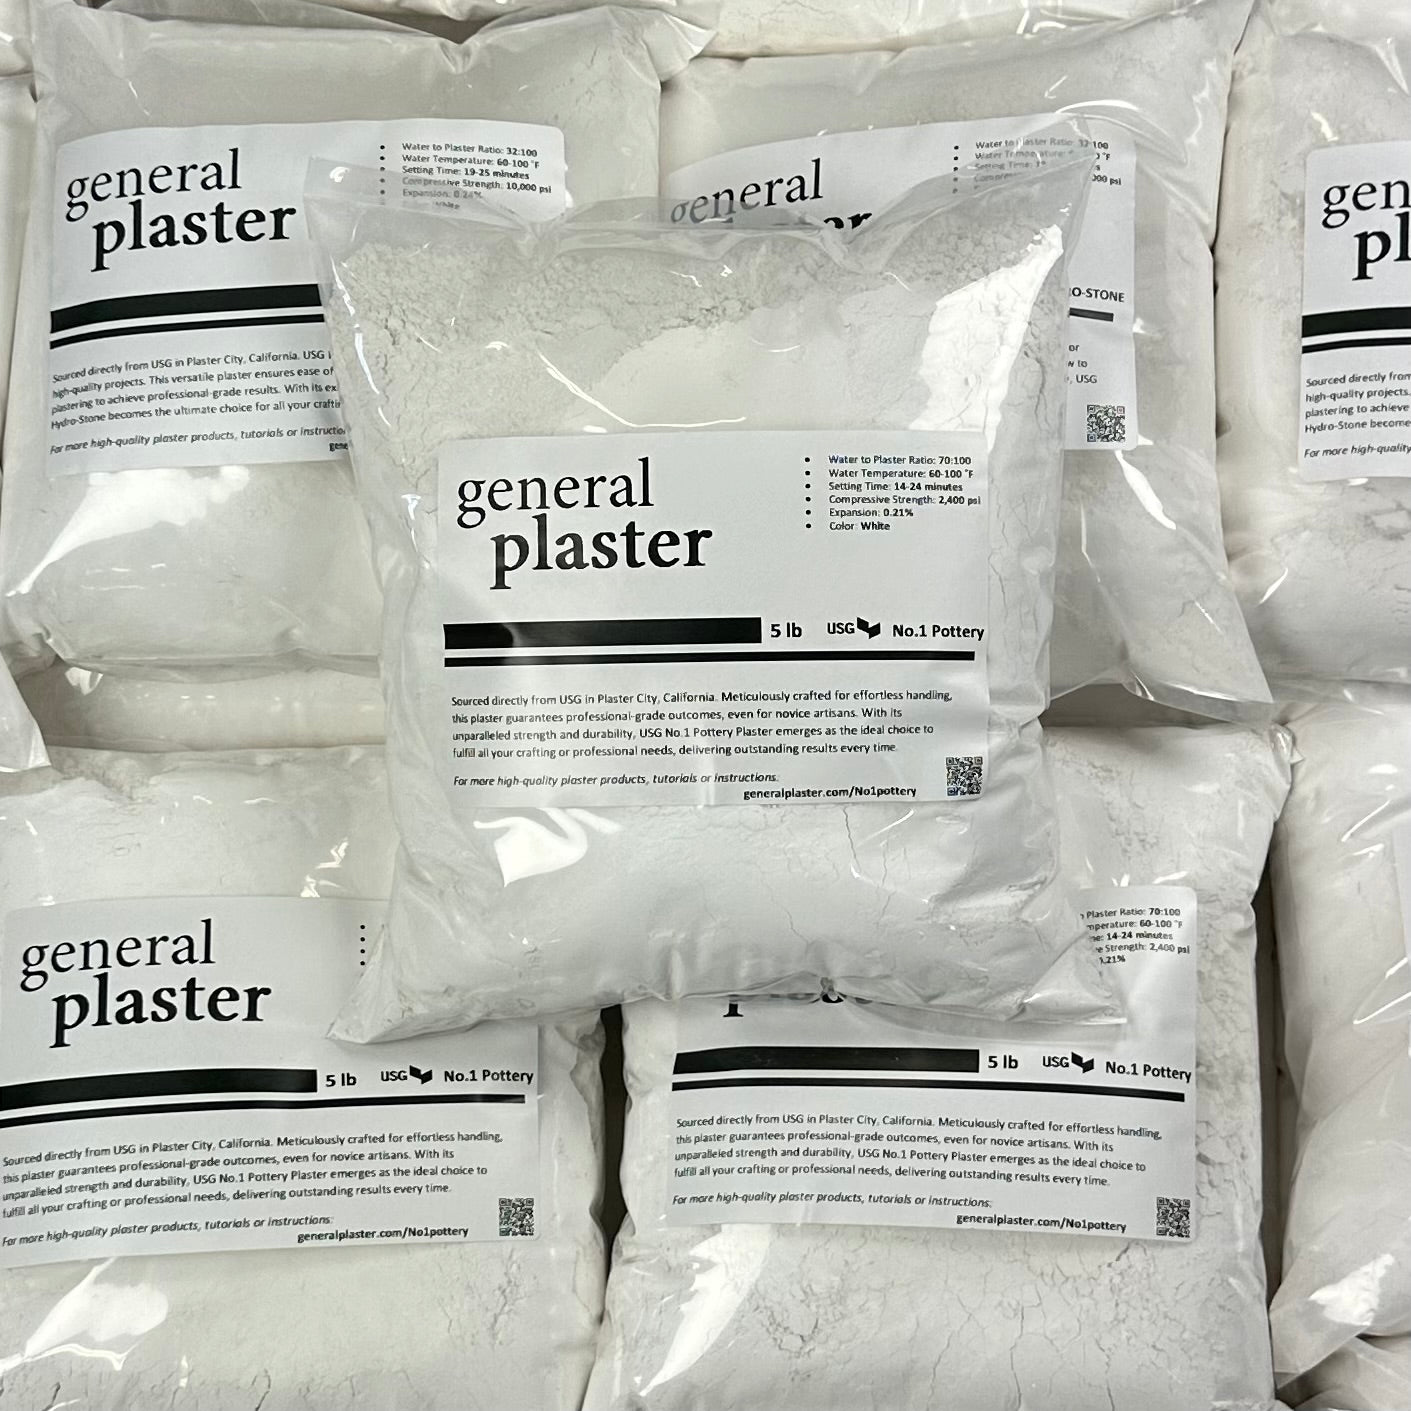 A sealed 5 lb bag of USG No. 1 Pottery plaster as sold by us at GP